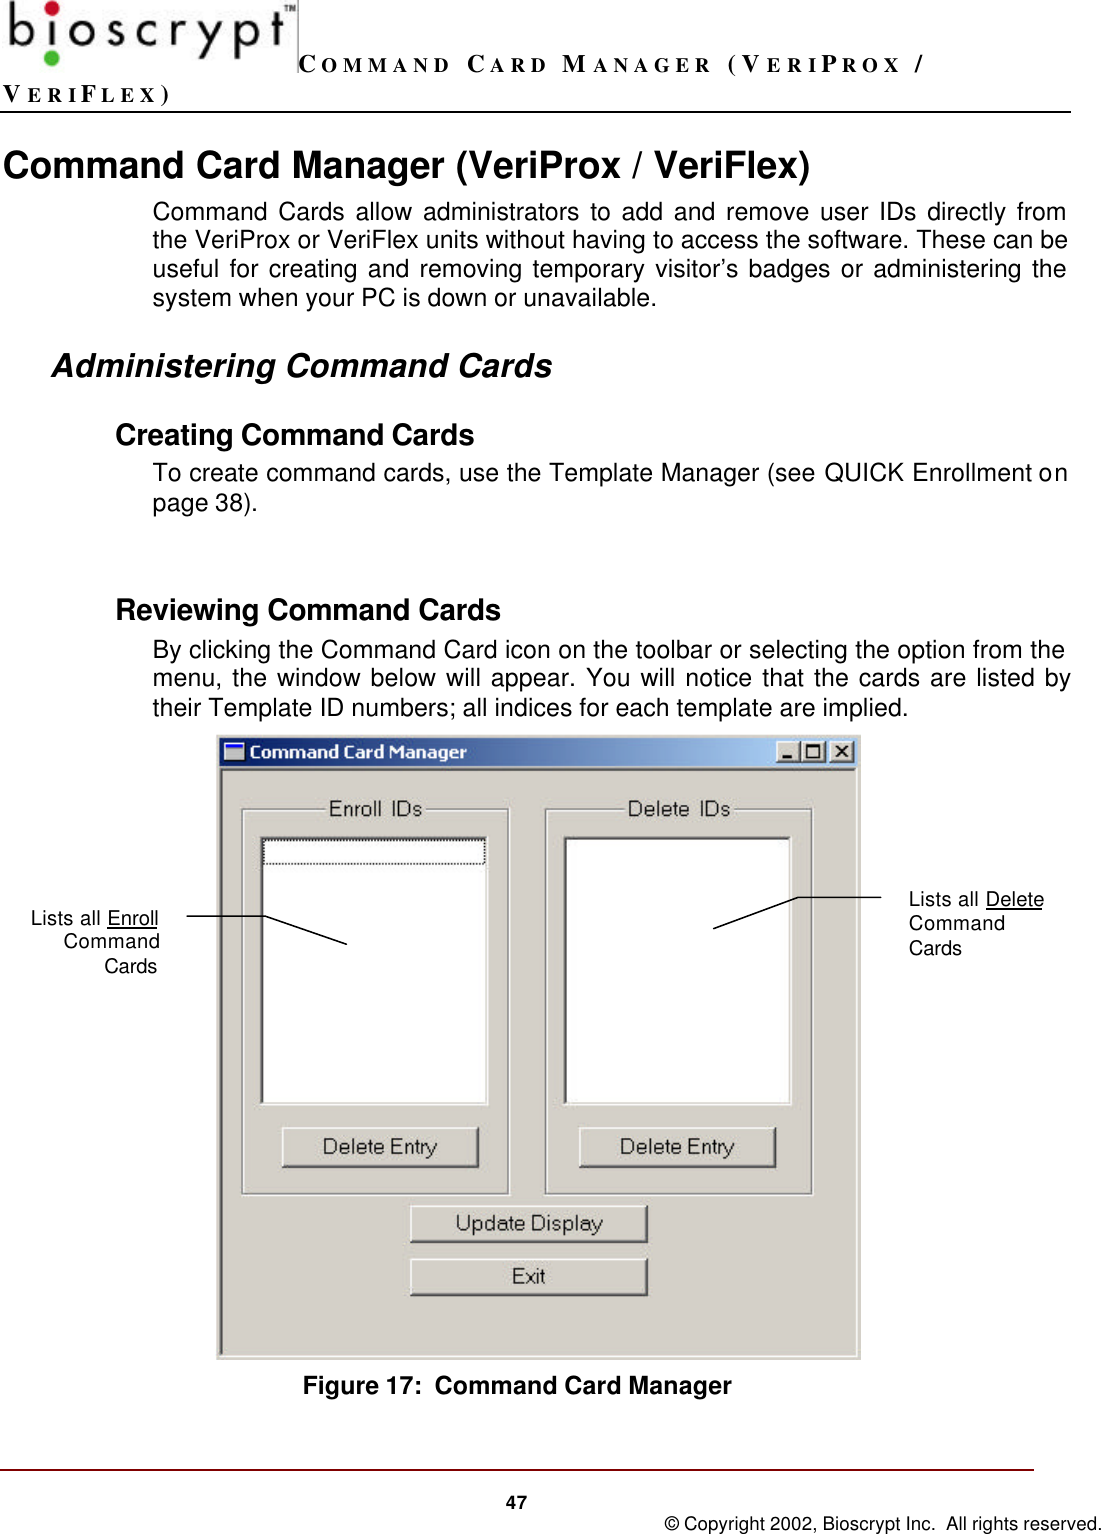 COMMAND CARD MANAGER (VERIPROX /VERIFLEX)47 © Copyright 2002, Bioscrypt Inc.  All rights reserved.Command Card Manager (VeriProx / VeriFlex)Command Cards allow administrators to add and remove user IDs directly fromthe VeriProx or VeriFlex units without having to access the software. These can beuseful for creating and removing temporary visitor’s badges or administering thesystem when your PC is down or unavailable.Administering Command CardsCreating Command CardsTo create command cards, use the Template Manager (see QUICK Enrollment onpage 38).Reviewing Command CardsBy clicking the Command Card icon on the toolbar or selecting the option from themenu, the window below will appear. You will notice that the cards are listed bytheir Template ID numbers; all indices for each template are implied. Figure 17:  Command Card ManagerLists all DeleteCommandCardsLists all EnrollCommandCards